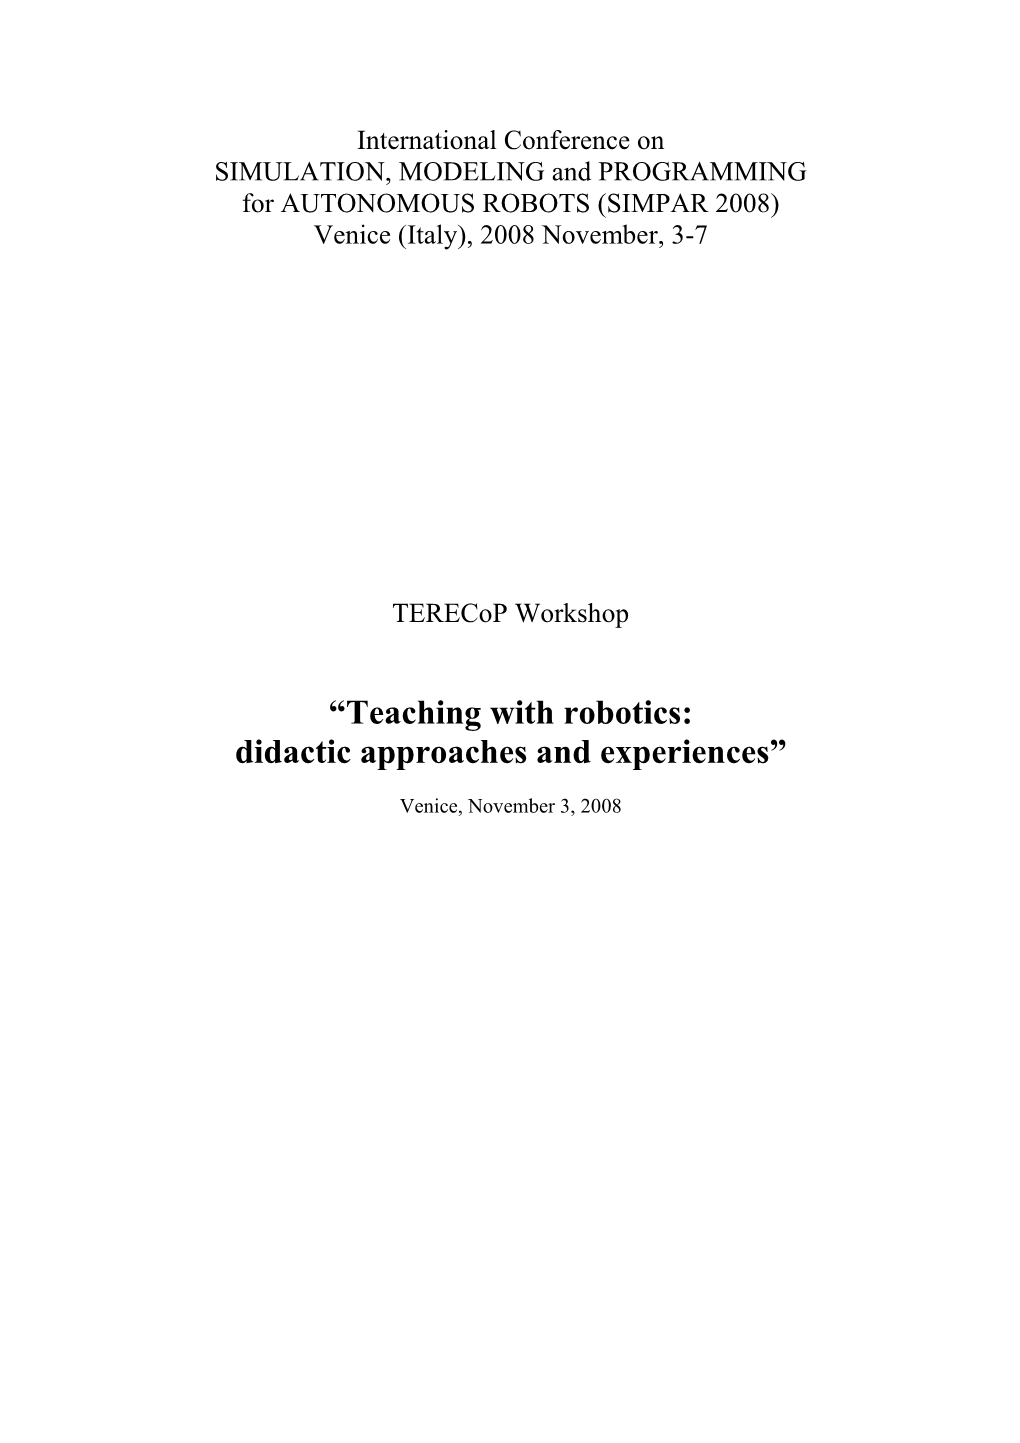 “Teaching with Robotics: Didactic Approaches and Experiences”